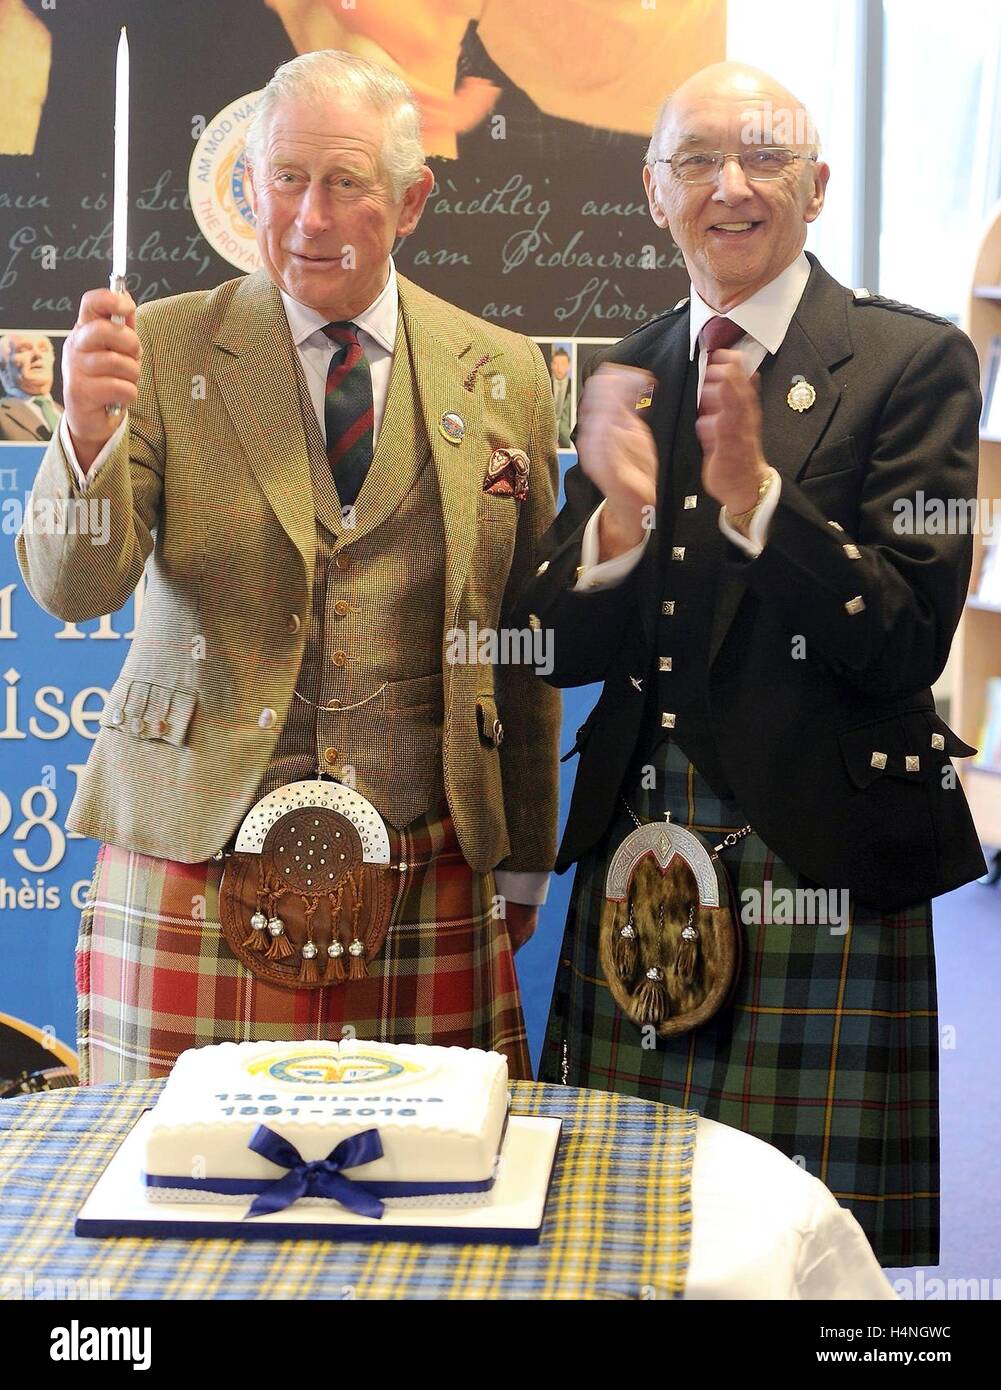 The Prince of Wales, known as the Lord of the Isles while in the Western Isles, (left) cuts a commemorative cake to mark the 125th anniversary of An Comunn Gaidhealach, alongside John Macleod, President of An Comunn Gaidhealach, at the Nicholson Institute in Stornoway, Isle of Lewis. Stock Photo